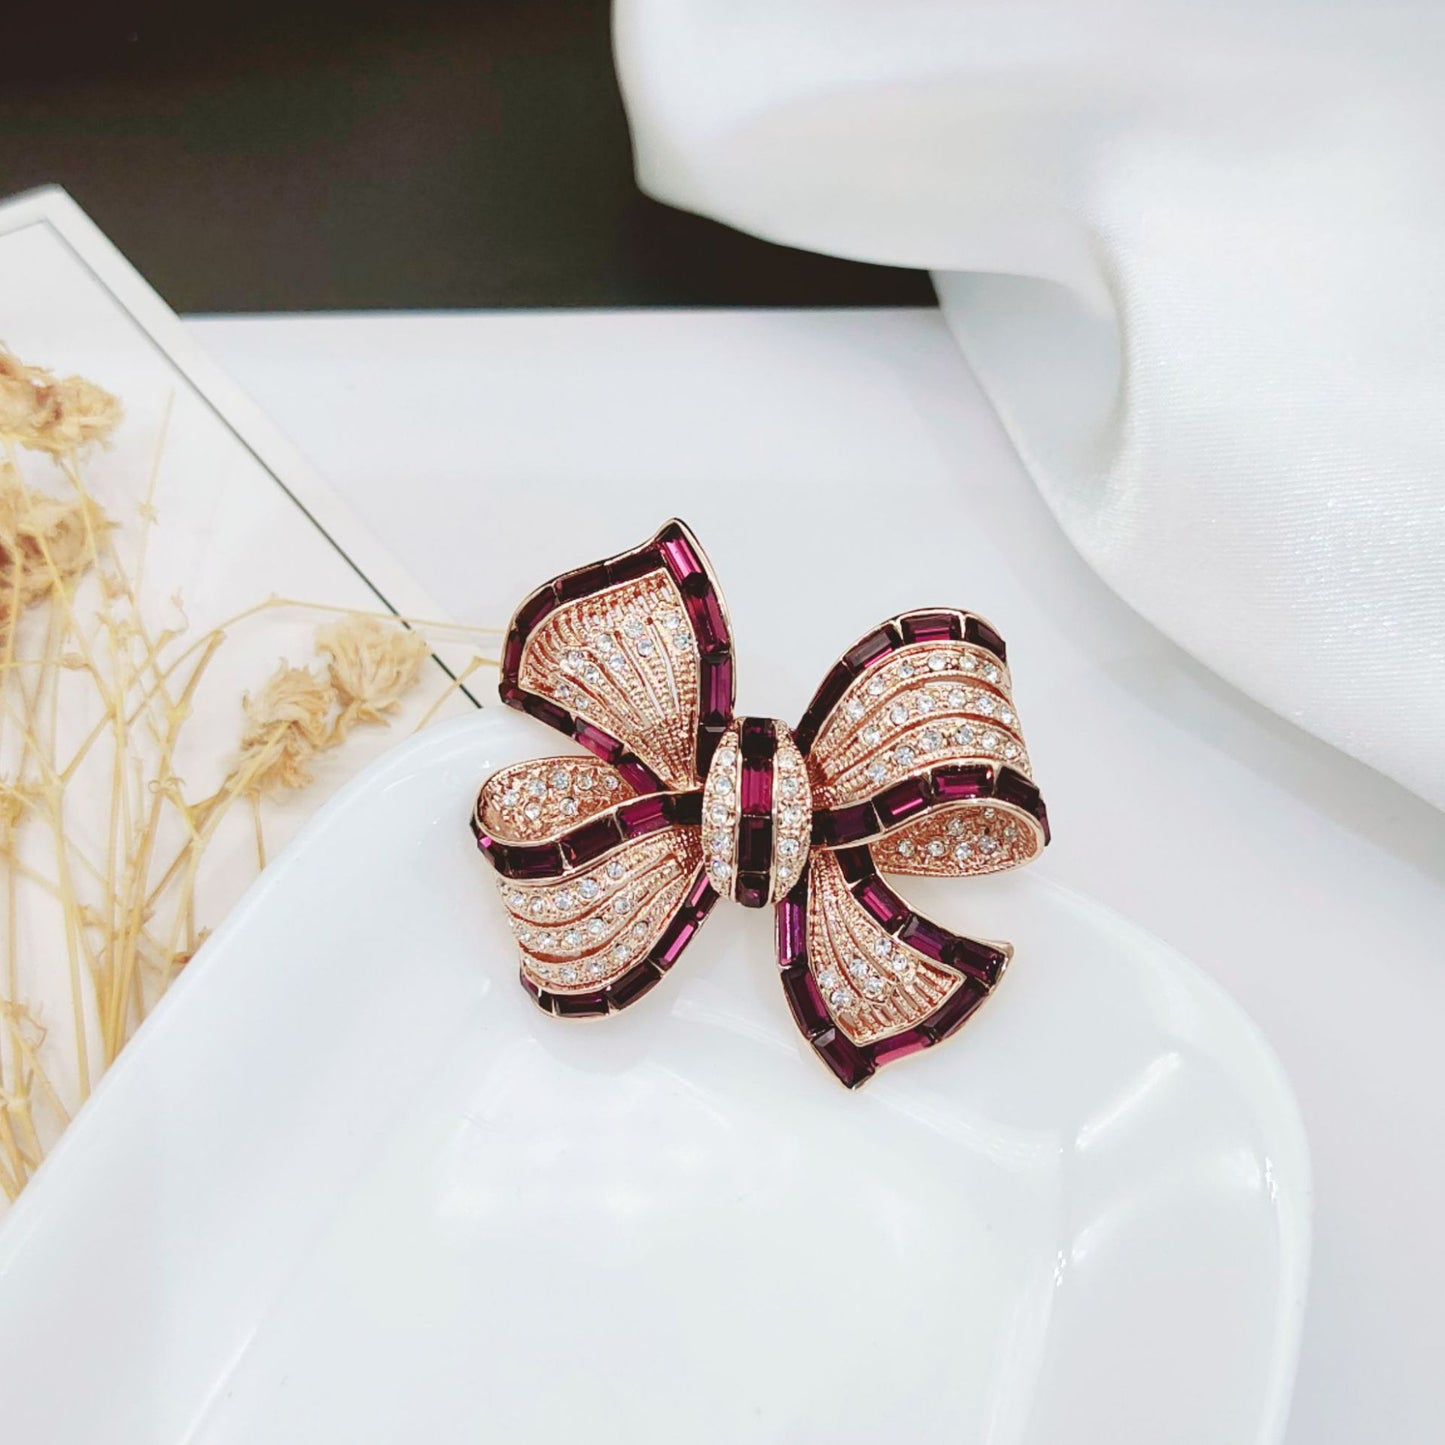 New Fashion Gold-Plated Bow Brooch - All-Match Accessory for Women